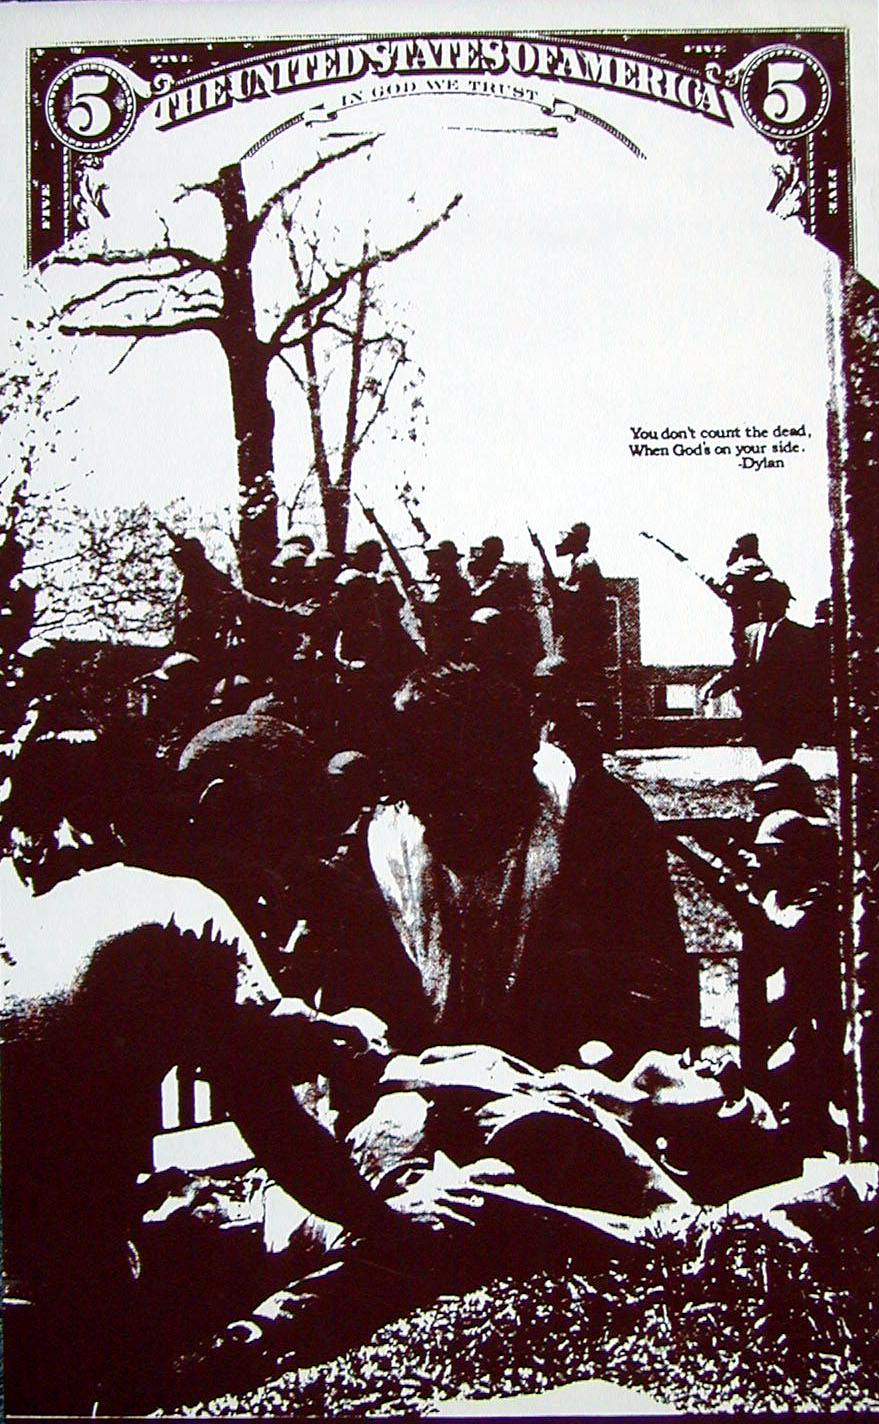 Anonymous - The United States Of America, You don't count the dead when God is on your side - Dylan (brown),1970